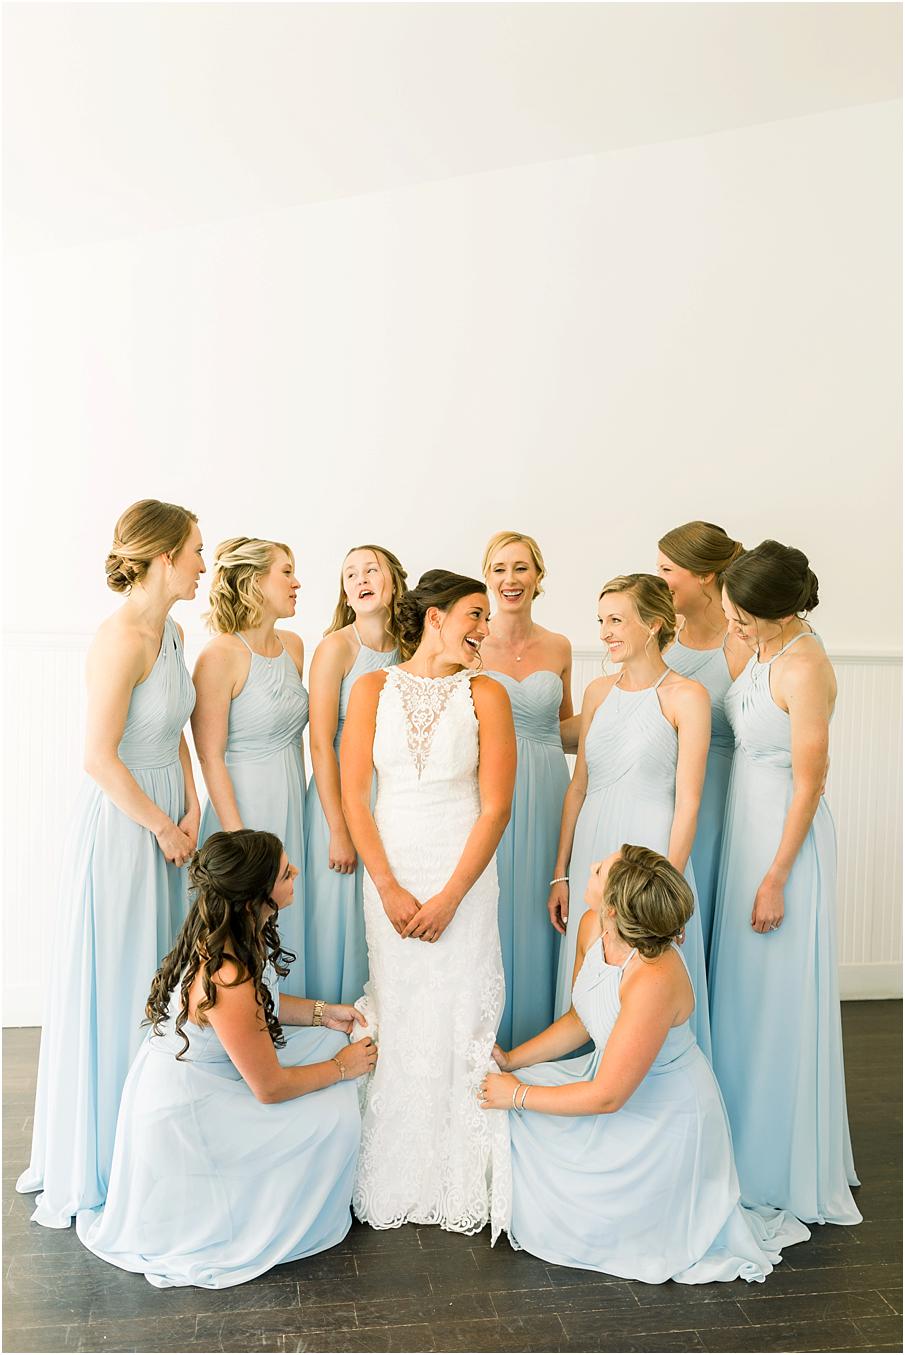 Bride in her stunning lace wedding gown, bridesmaids in sky blue dresses getting bride ready to see her groom at Veritas Winery.